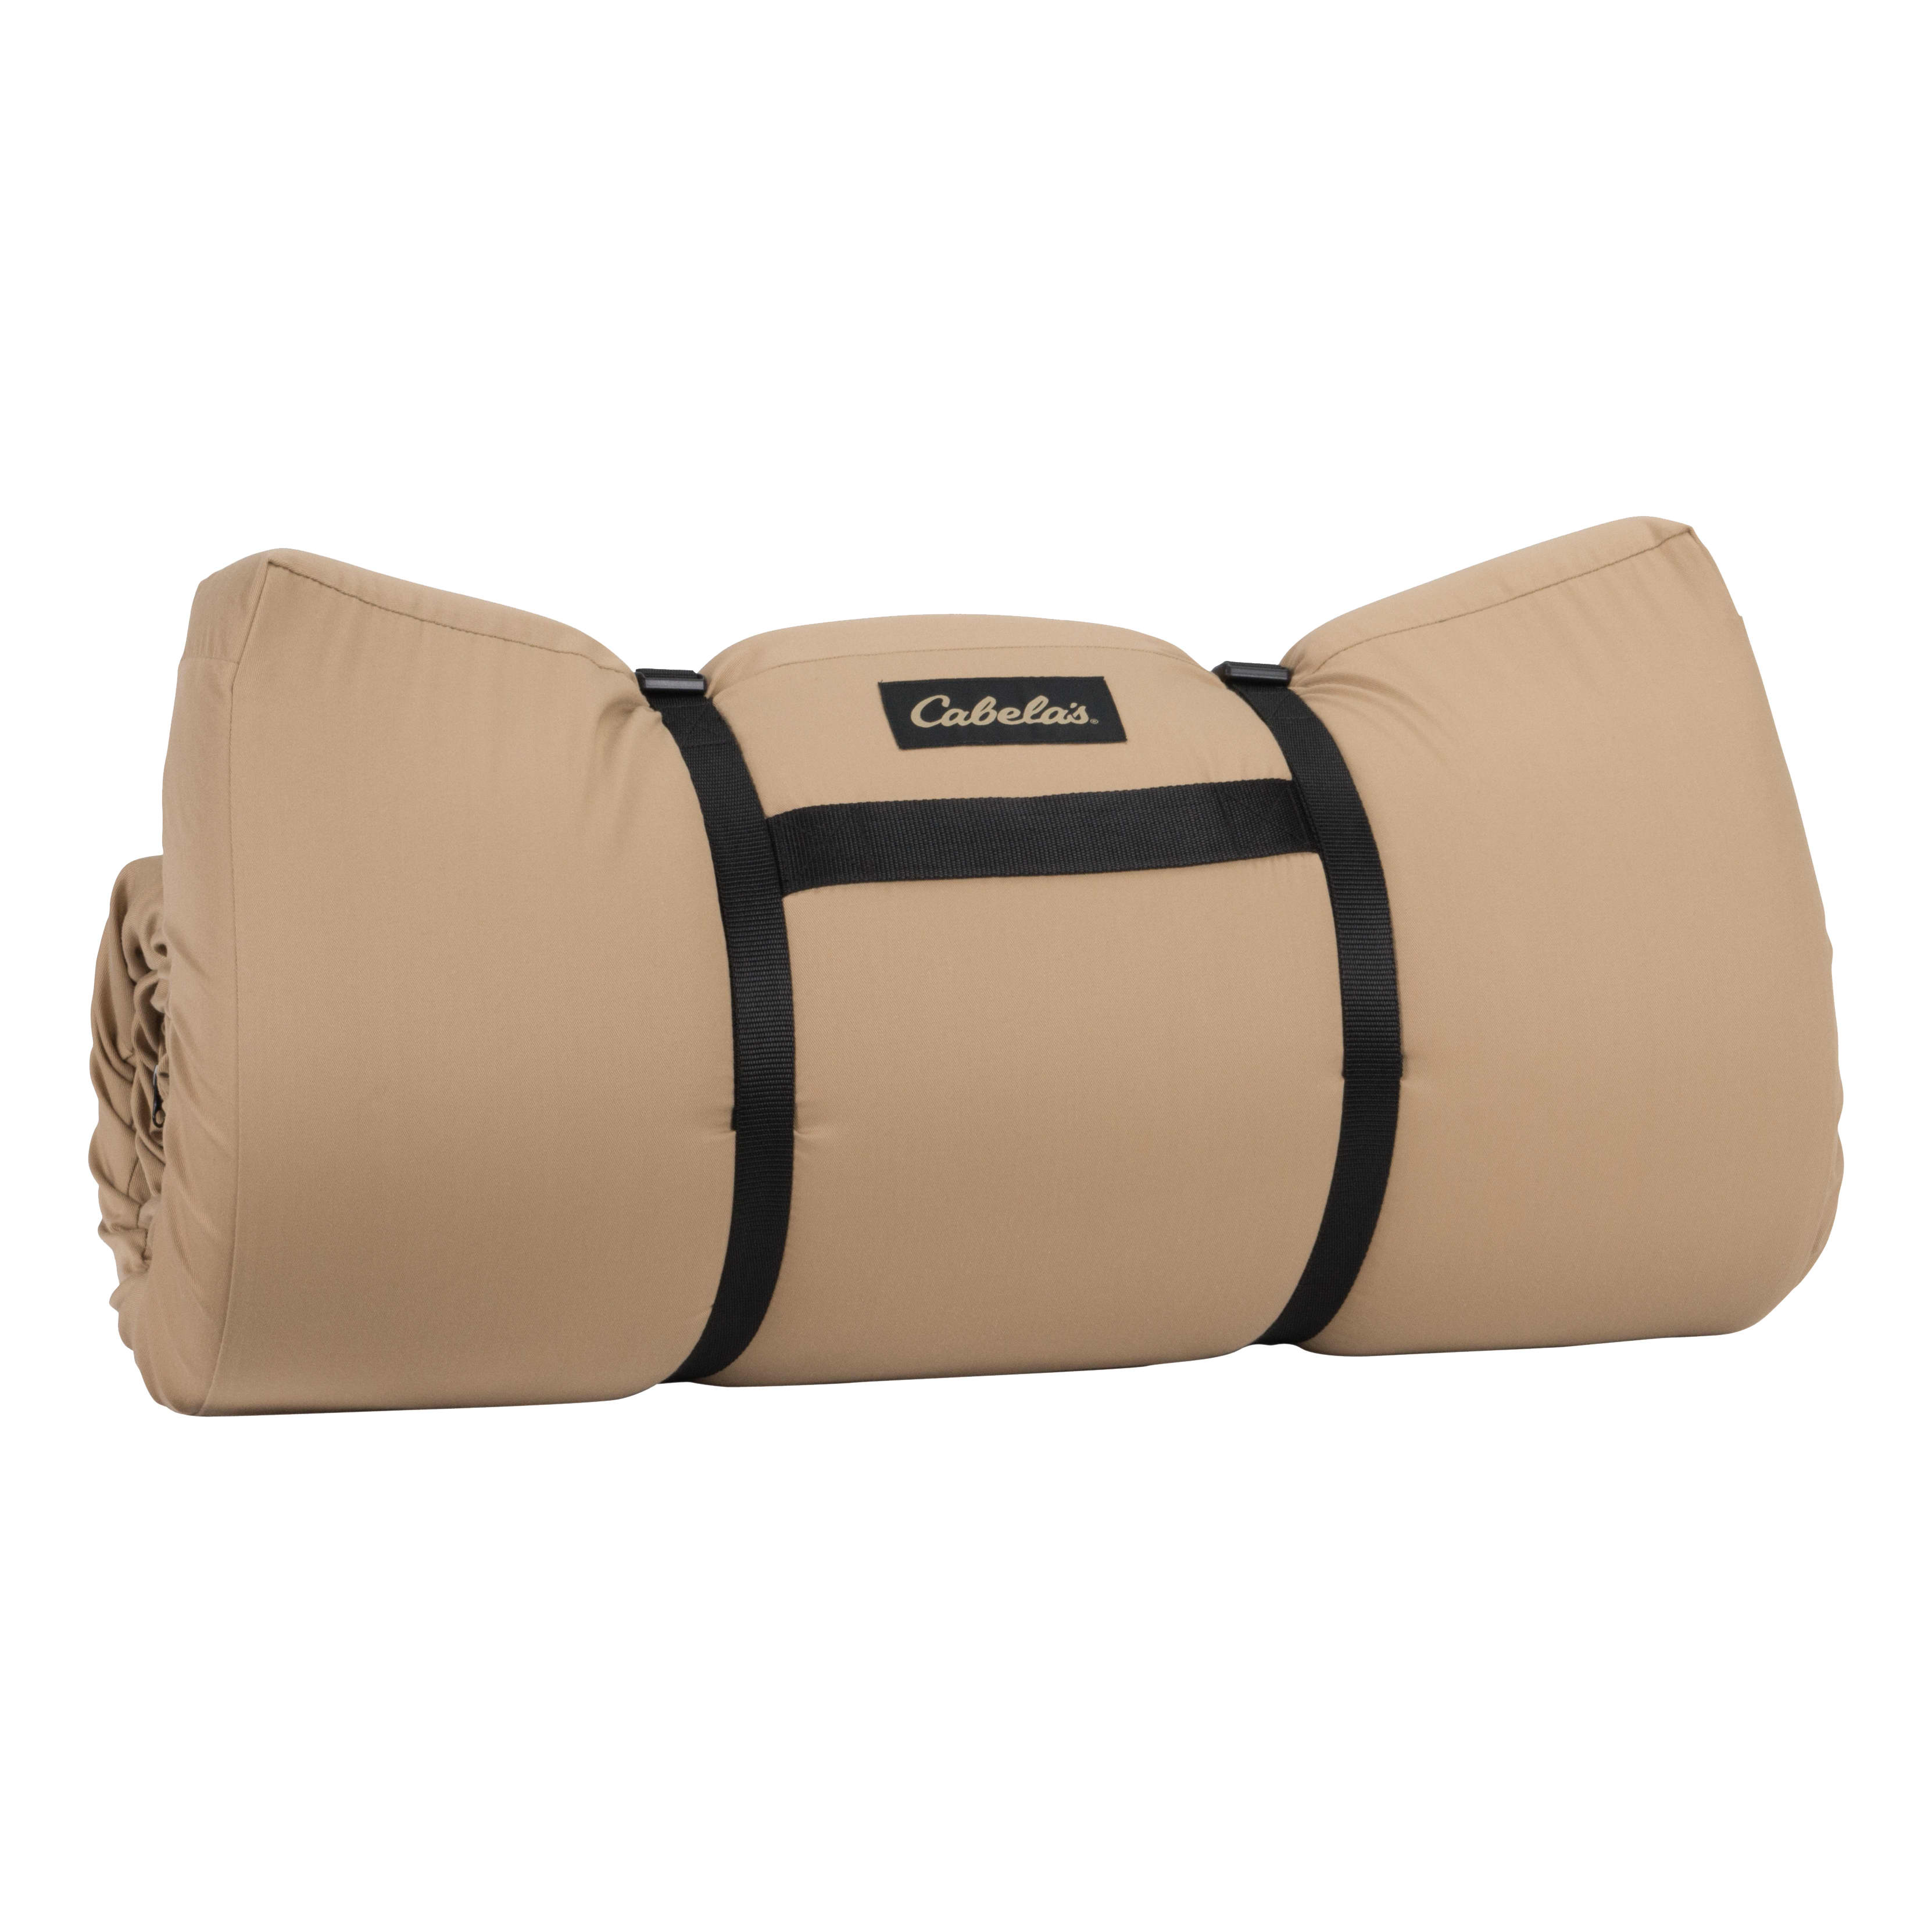 Cabela's Deluxe Cot Pad